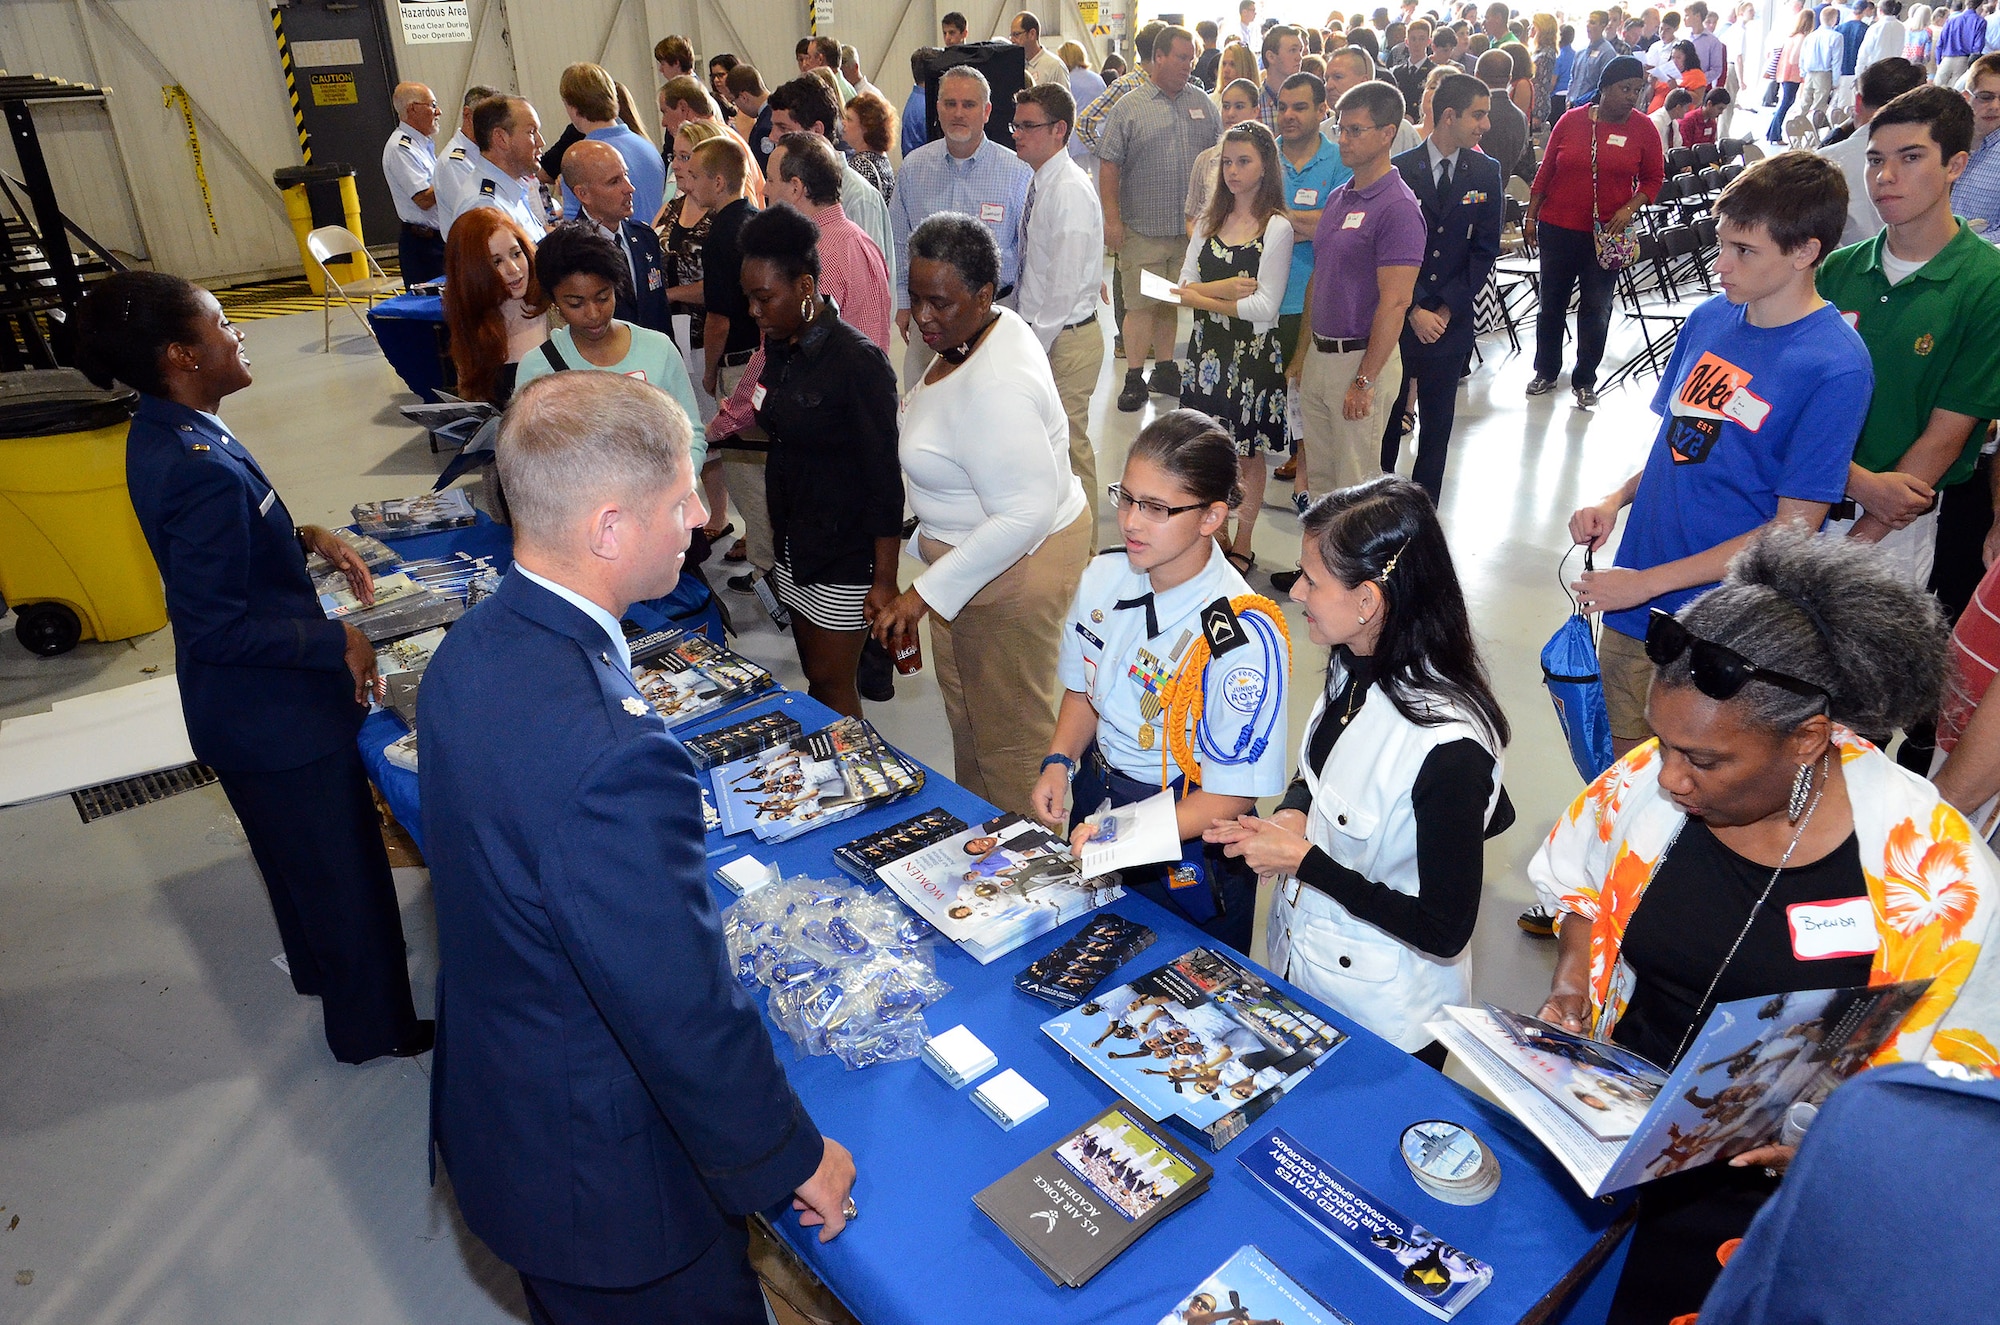 Representatives from the United States Air Force Academy discuss enrollment opportunities with 2015 Academy Day attendees at Dobbins Air Reserve Base, Ga., May 9, 2015. The annual event provides high school students the opportunity to meet with representatives from each of the service academies, including West Point, the U.S. Naval Academy, the U.S. Air Force Academy, the Coast Guard Academy, and the U.S. Merchant Marines Academy. (U.S. Air Force photo/ Brad Fallin)